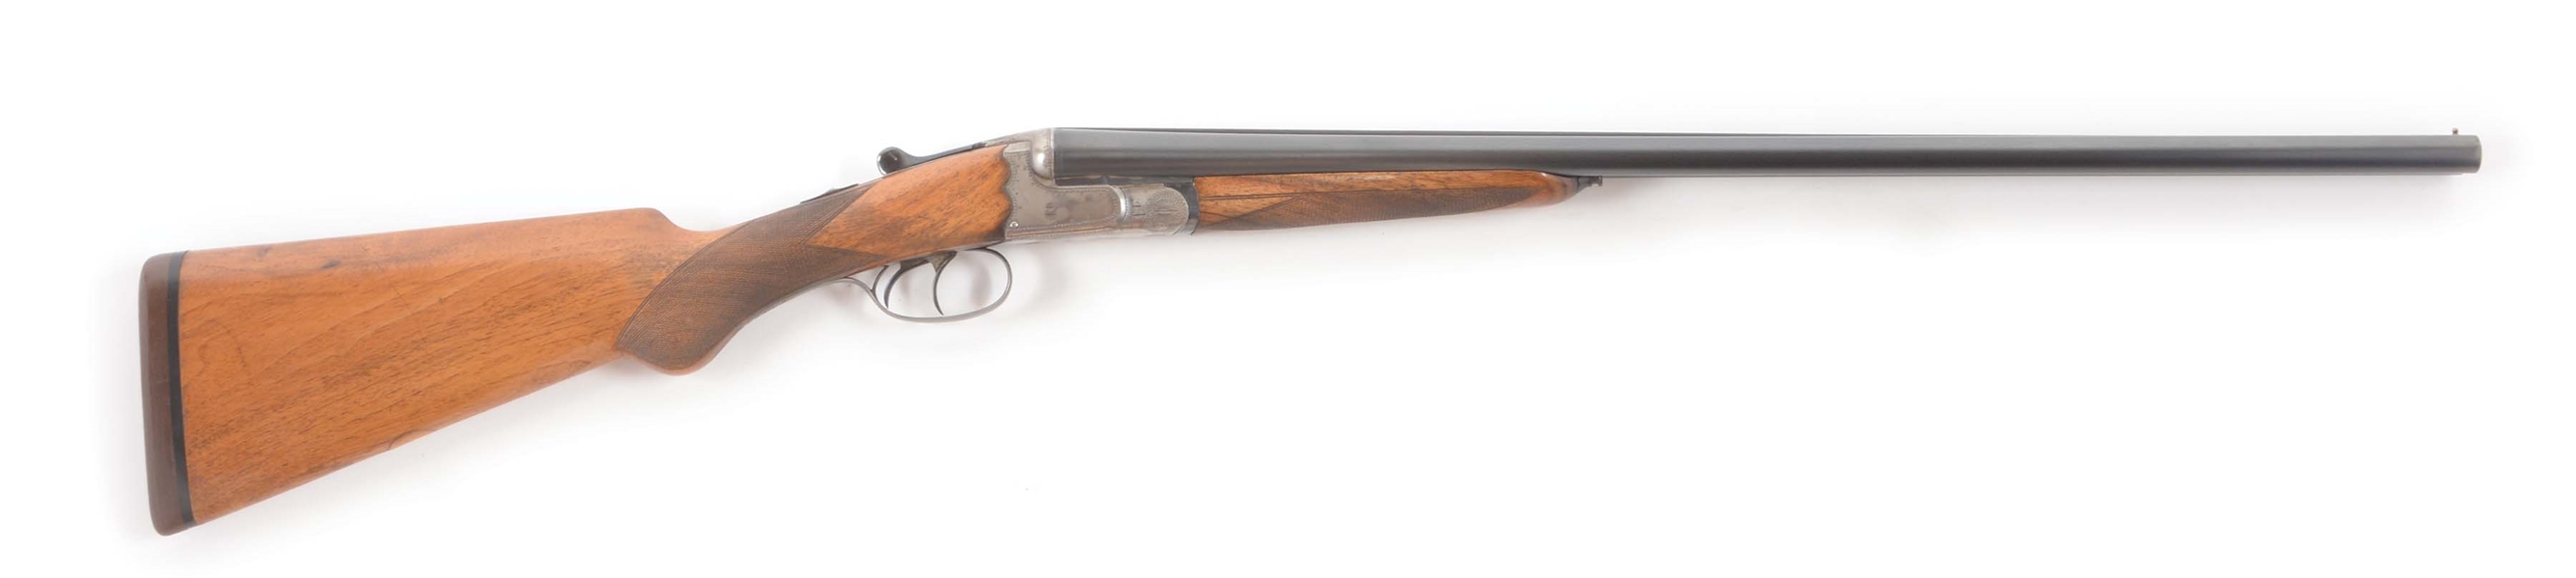 (C) 20 BORE SHOTGUN MADE BY ZOLI AND F.LLI. RIZZINI FOR ABERCROMBIE AND FITCH.